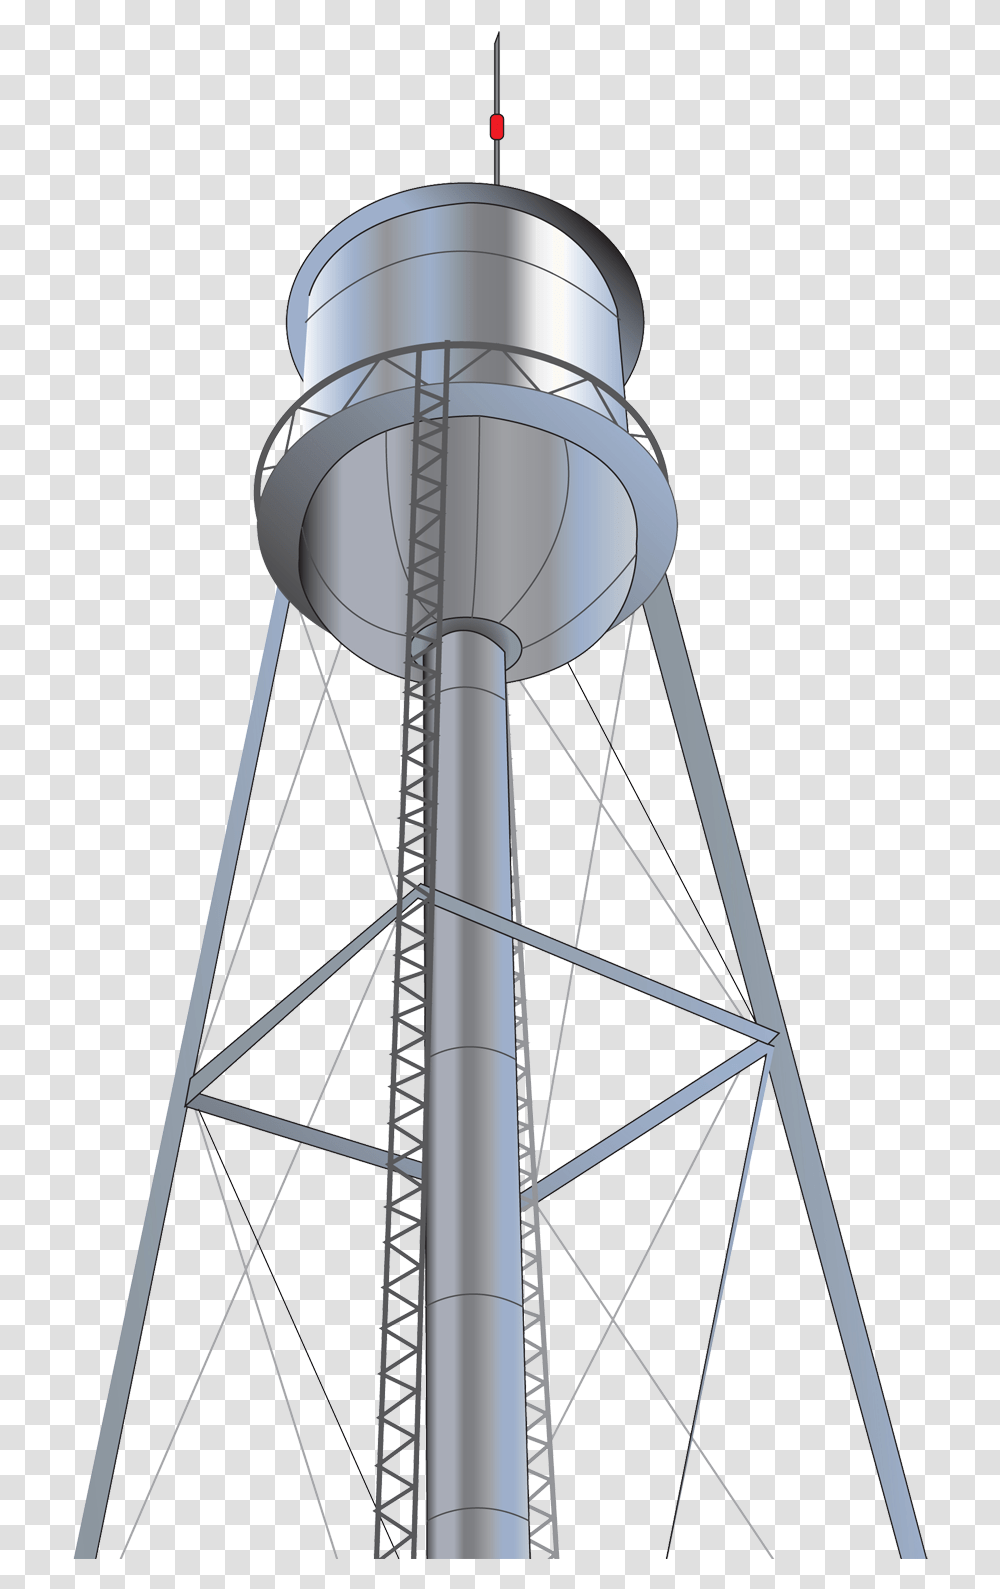 Water Tower Clip Art Free Steel Structure Water Tank, Utility Pole, Lamp Transparent Png